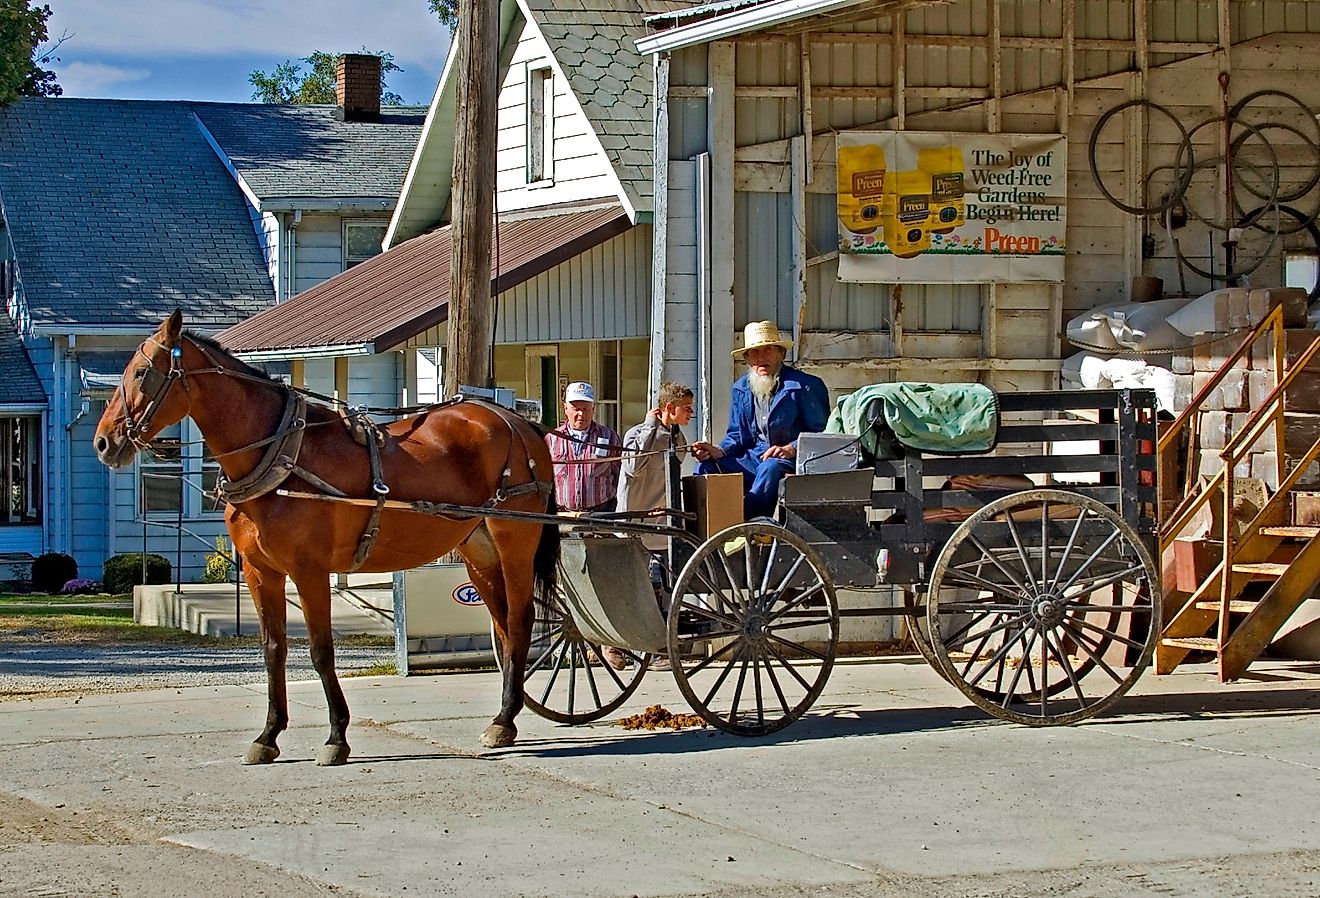 Amish couple in horse and buggy in Shipshewana Indiana. Image credit  Dennis MacDonald via Shutterstock